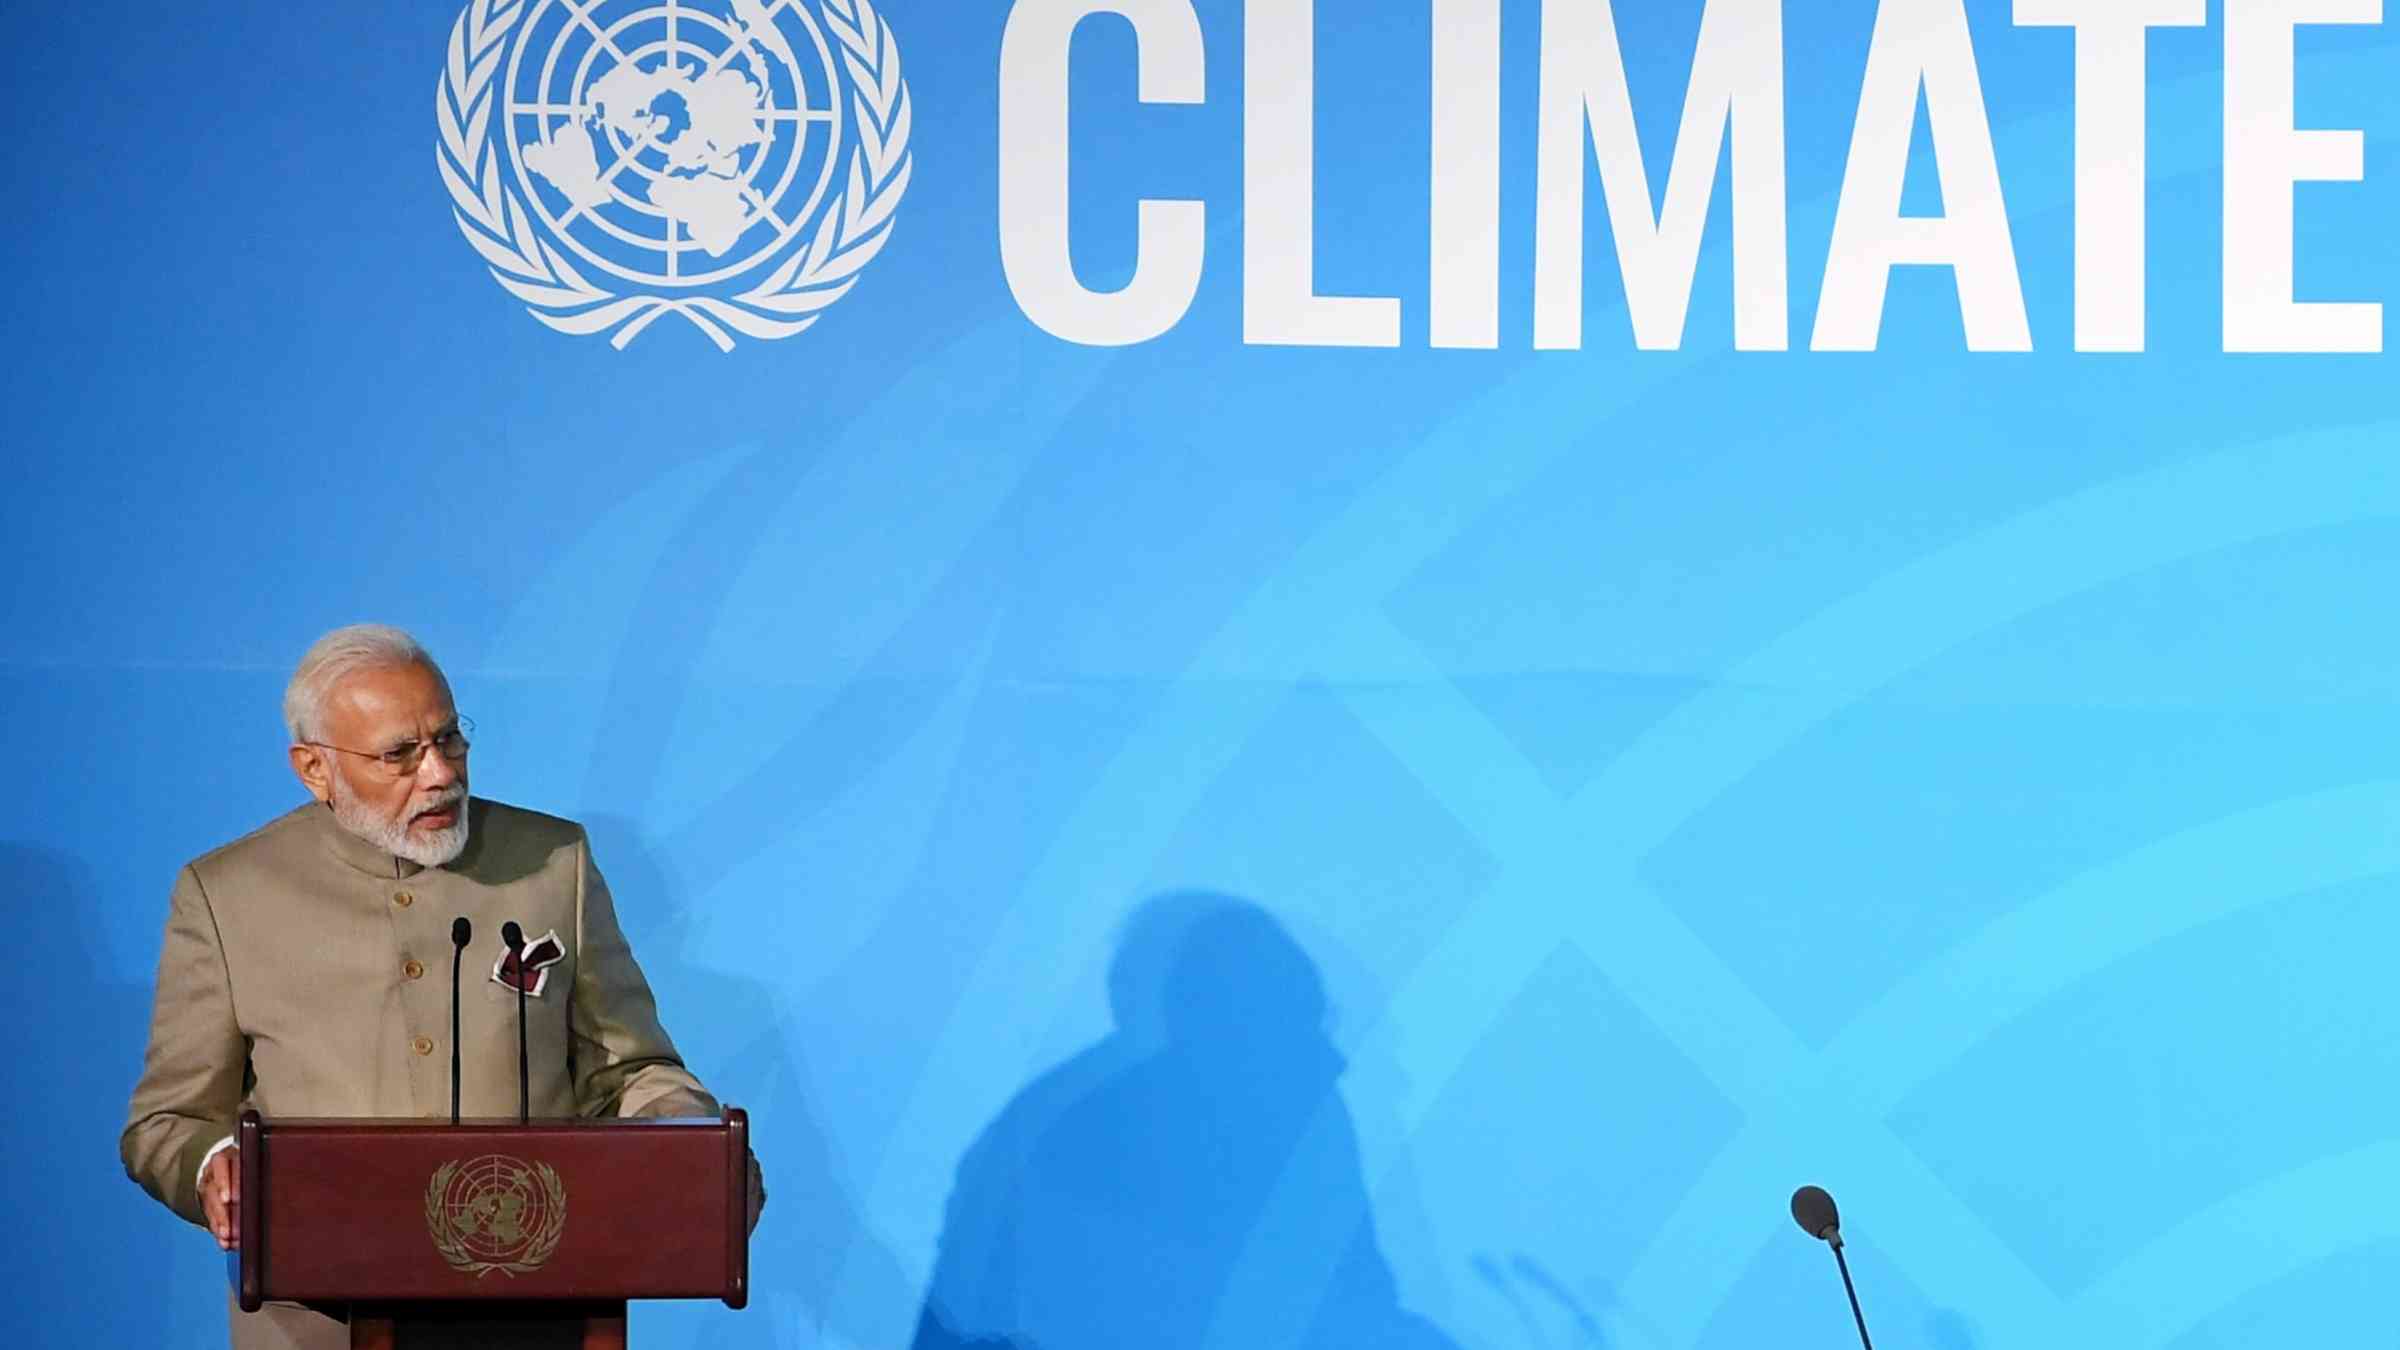 Prime Minister of India, Shri Narendra Modi announced a global Coalition for Disaster Resilient Infrastructure (CDRI), at the UN Climate Action Summit 2019 held in New York City, USA, on September 23, 2019.